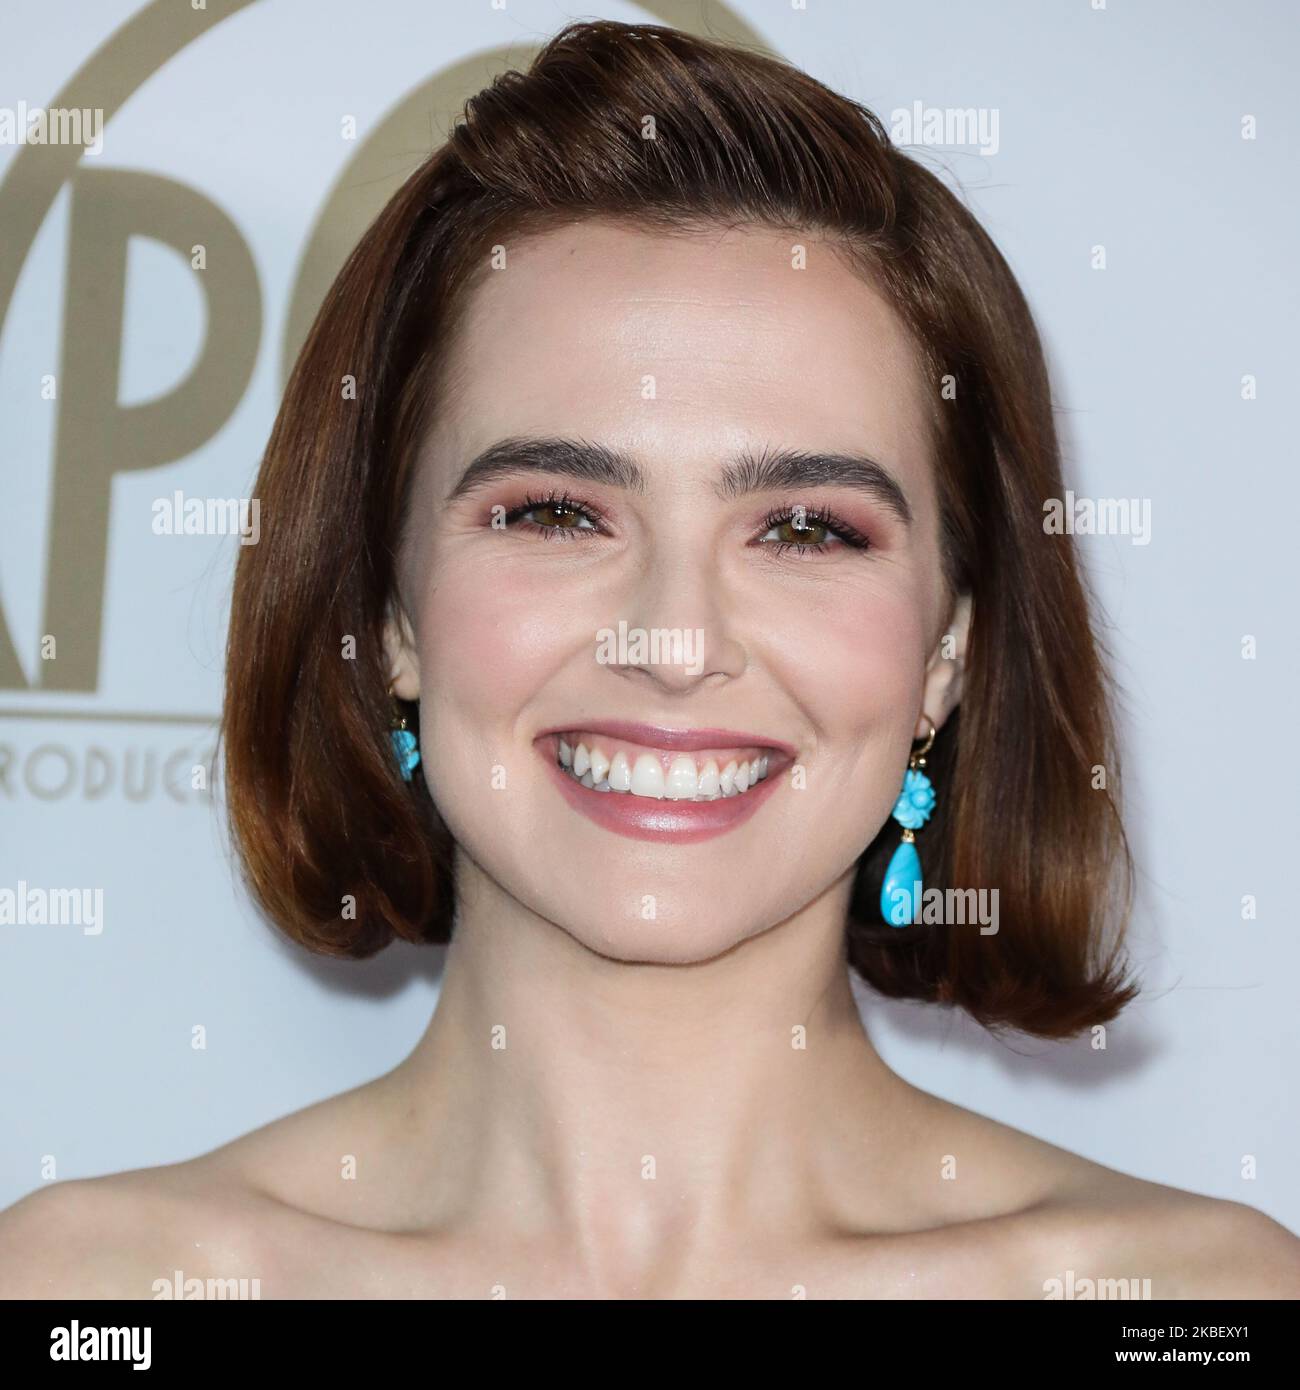 HOLLYWOOD, LOS ANGELES, CALIFORNIA, USA - JANUARY 18: Actress Zoey Deutch wearing an Oscar de la Renta gown, Irene Neuwirth earrings, and Christian Louboutin heels arrives at the 31st Annual Producers Guild Awards held at the Hollywood Palladium on January 18, 2020 in Hollywood, Los Angeles, California, United States. (Photo by Xavier Collin/Image Press Agency/NurPhoto) Stock Photo